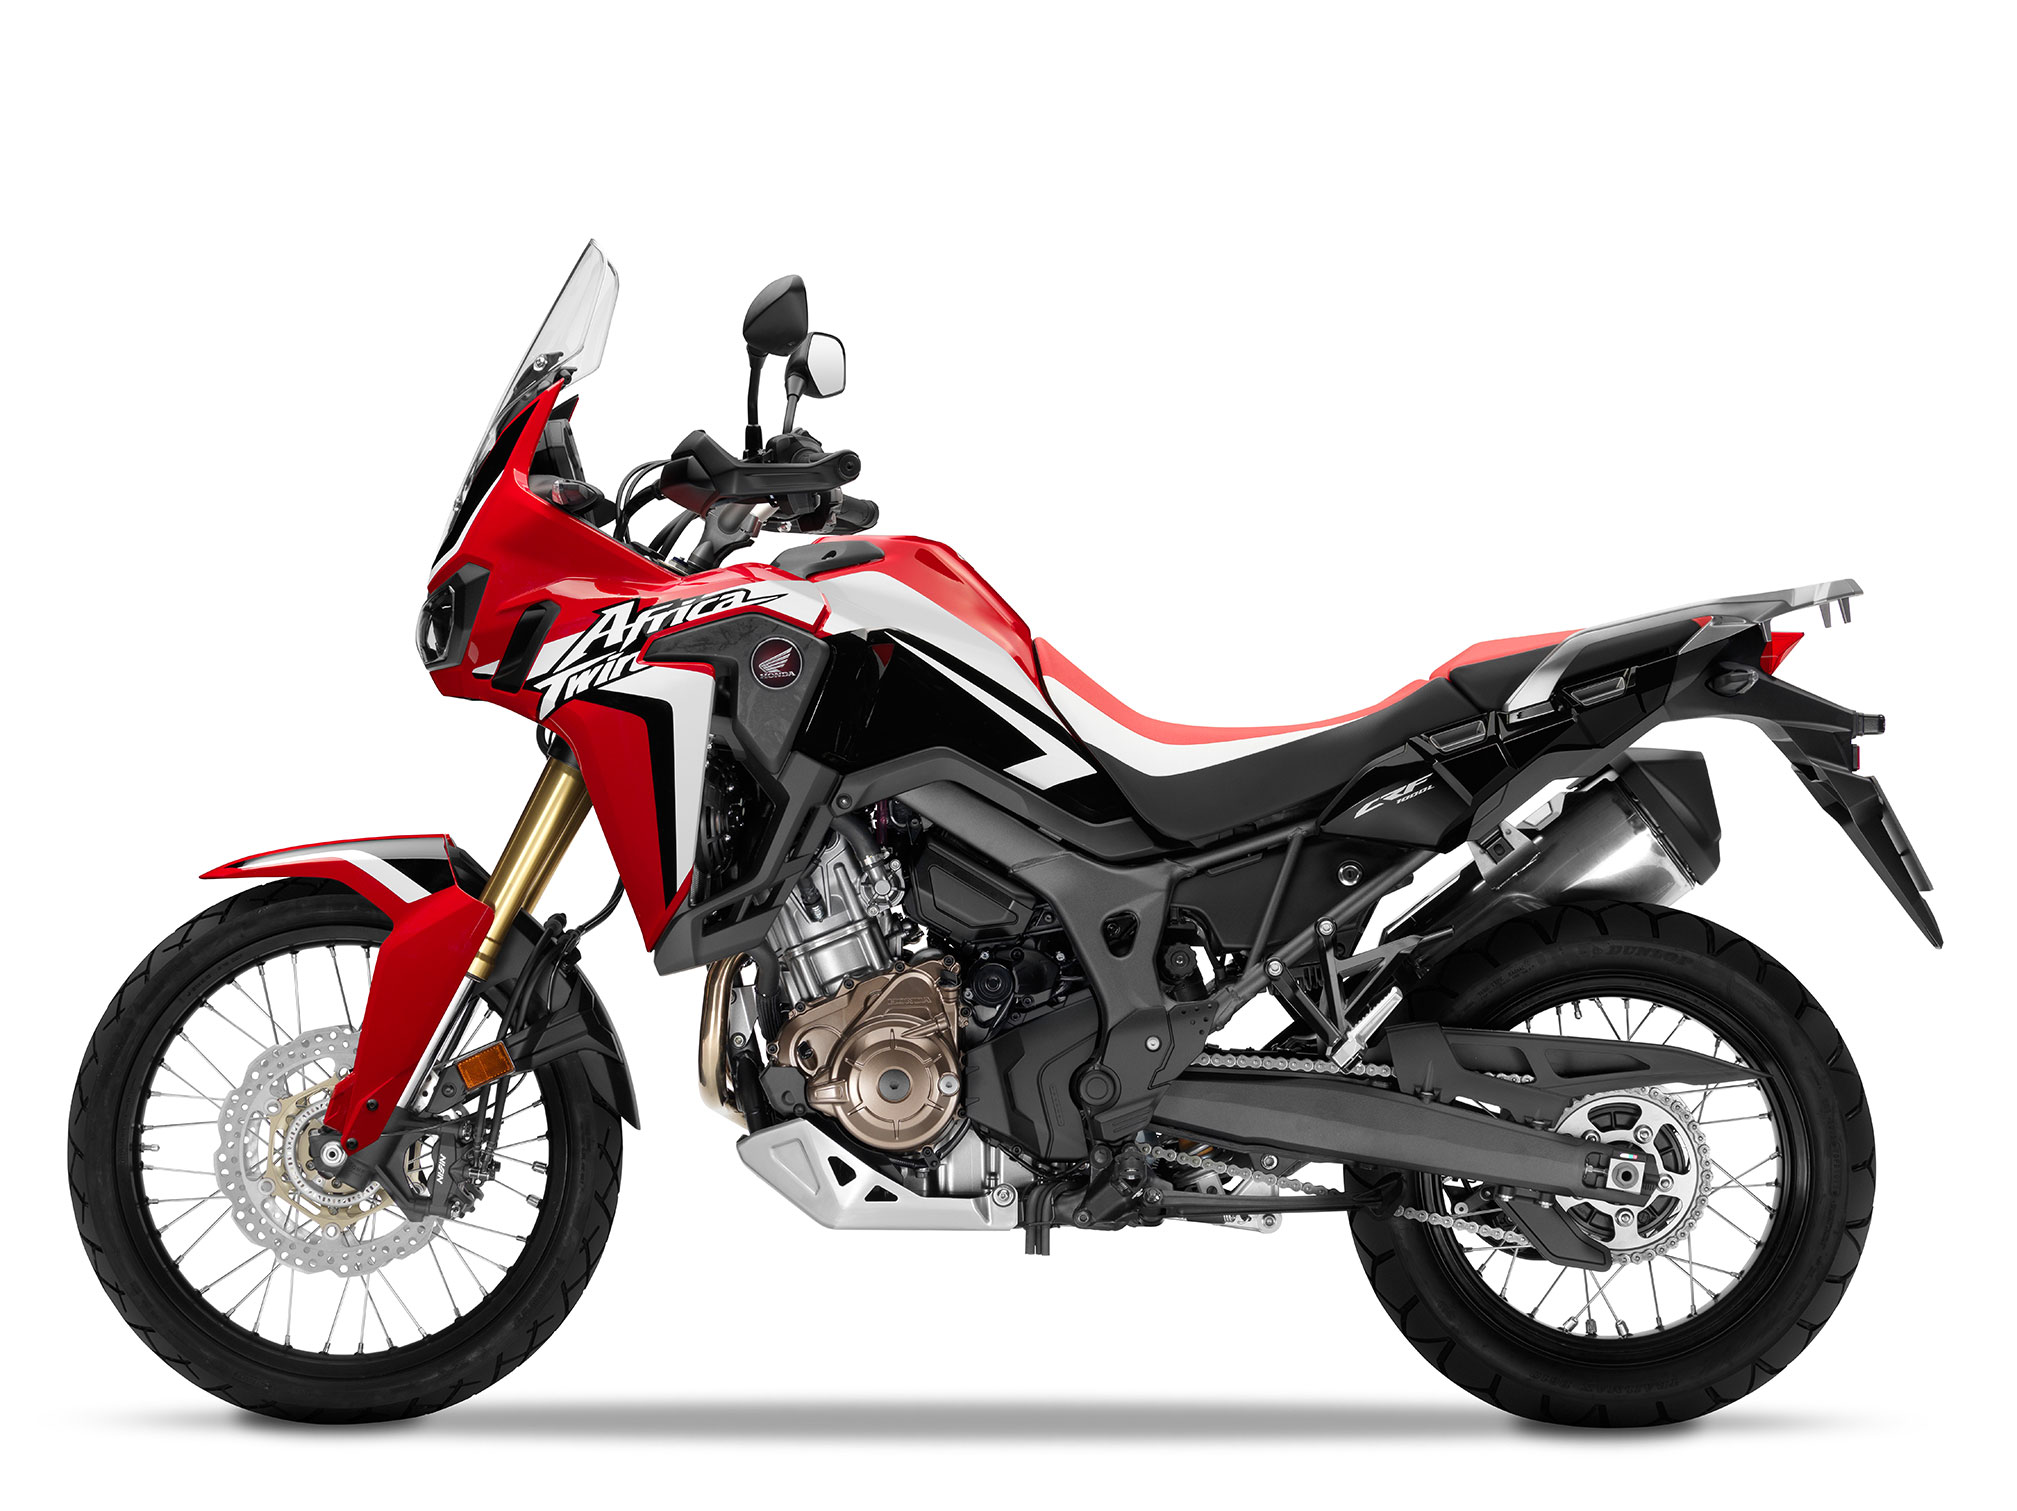 2017 Honda Africa Twin CRF1000L DCT Review